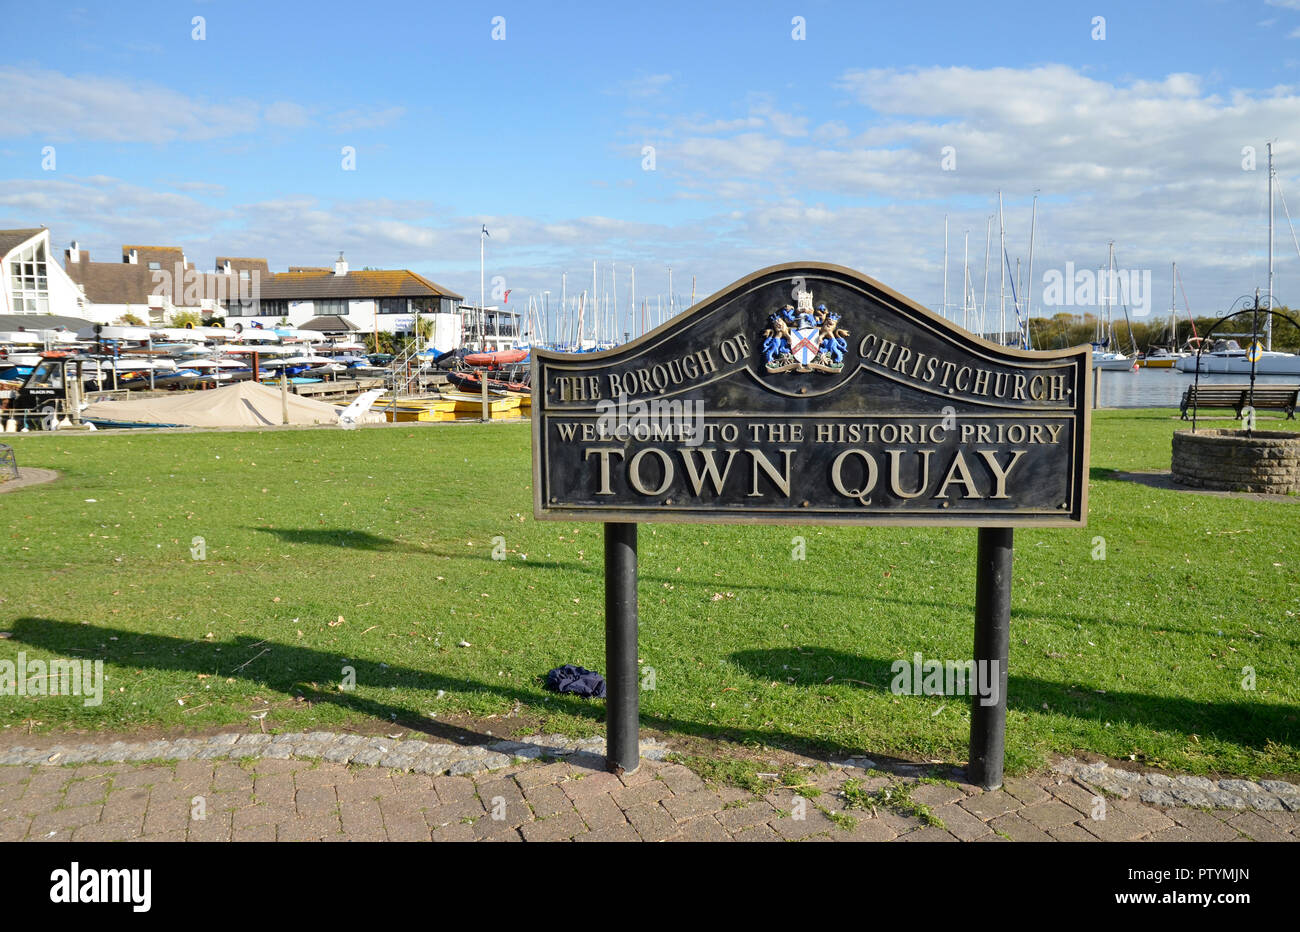 The Town Quay at Christchurch in Dorset, England Stock Photo